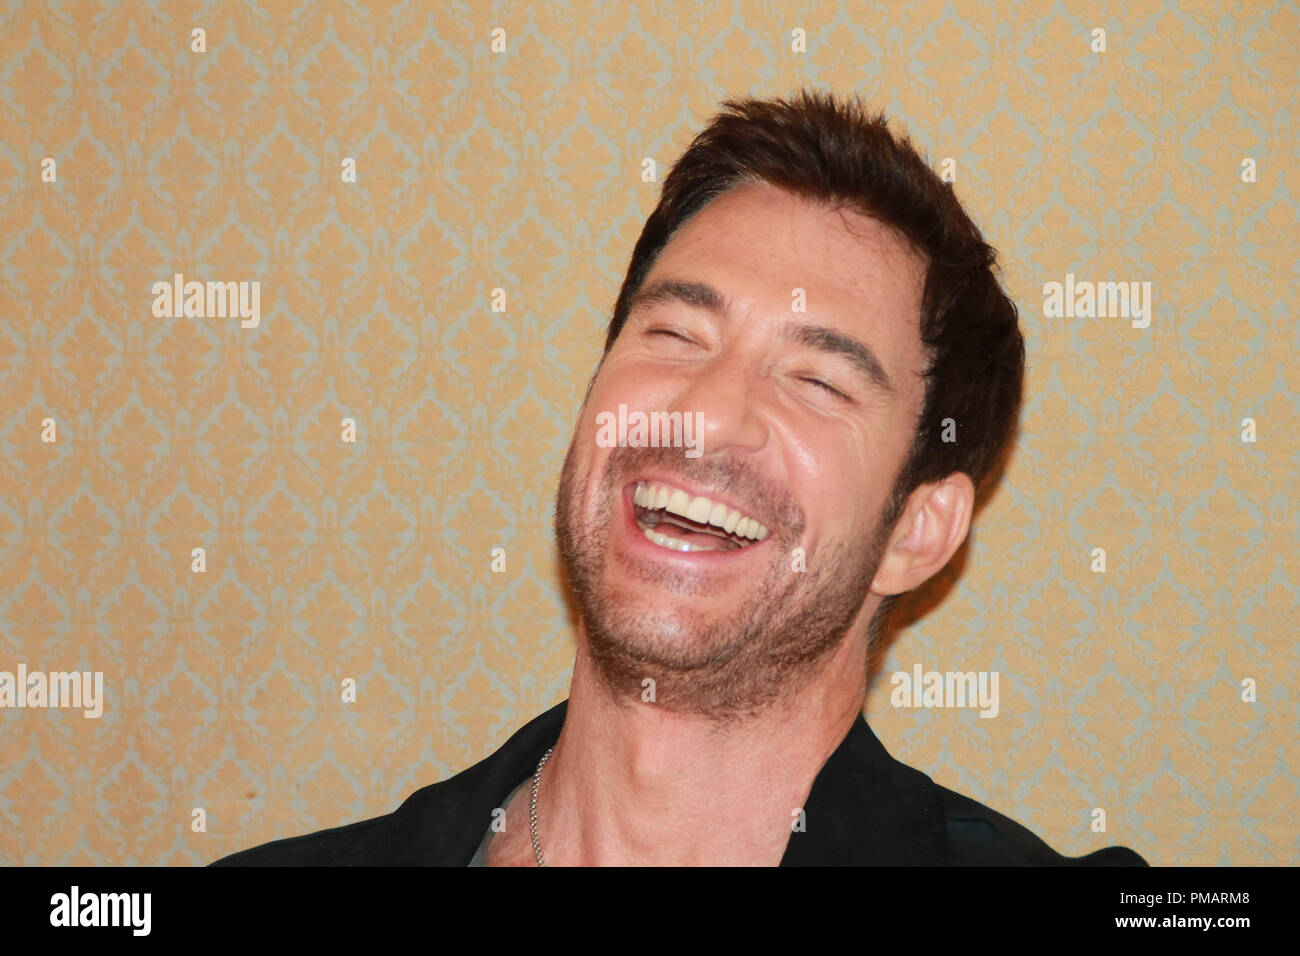 Dylan McDermott  'Hostages' TV Series Portrait Session, July 30, 2013. Reproduction by American tabloids is absolutely forbidden. File Reference # 32073 009JRC  For Editorial Use Only -  All Rights Reserved Stock Photo